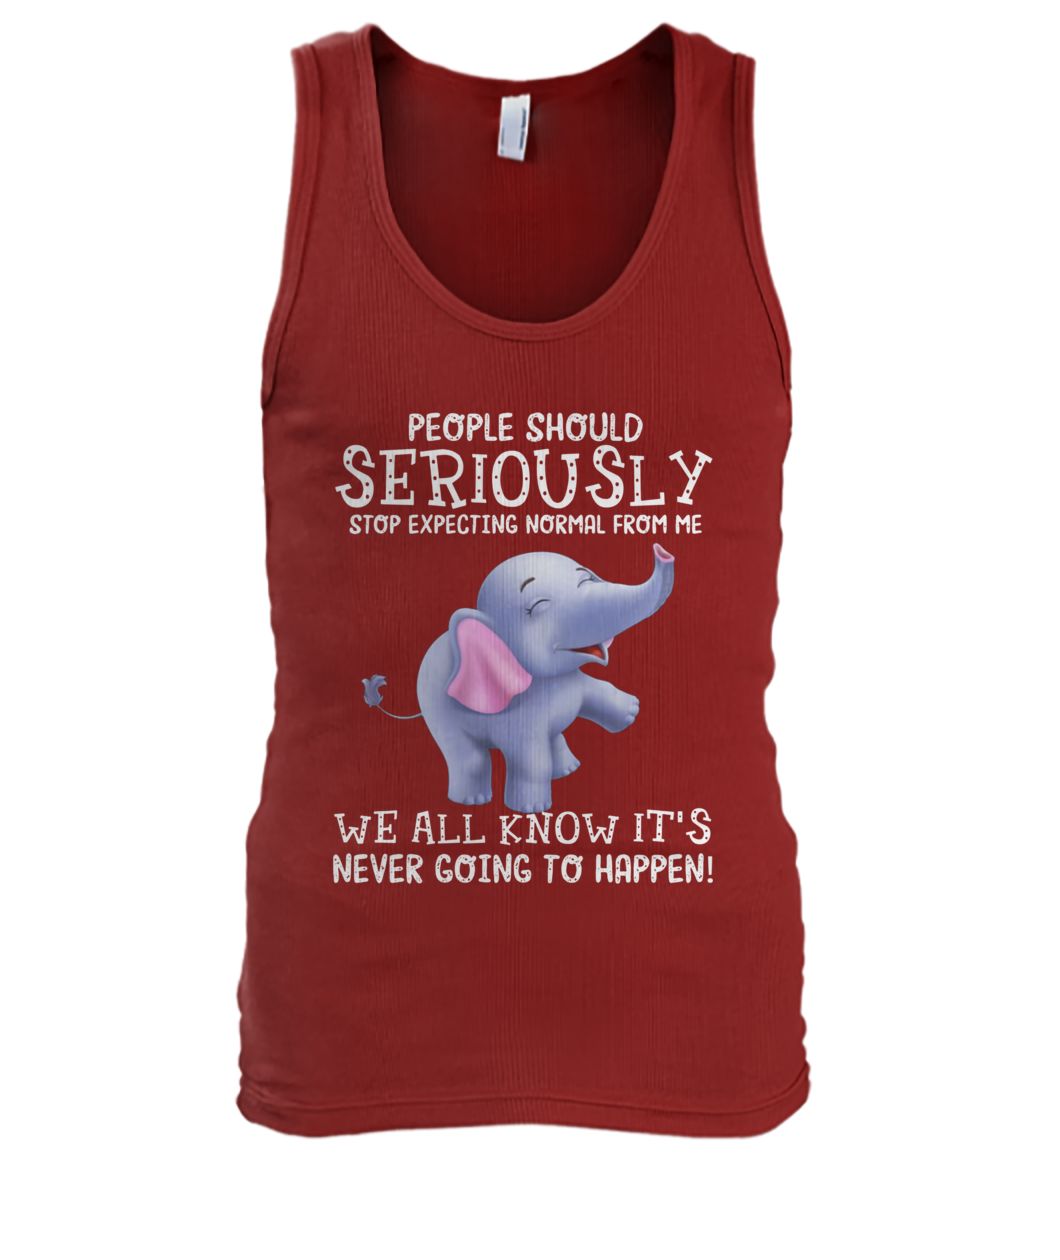 People should seriously stop expecting normal from me baby elephant men's tank top